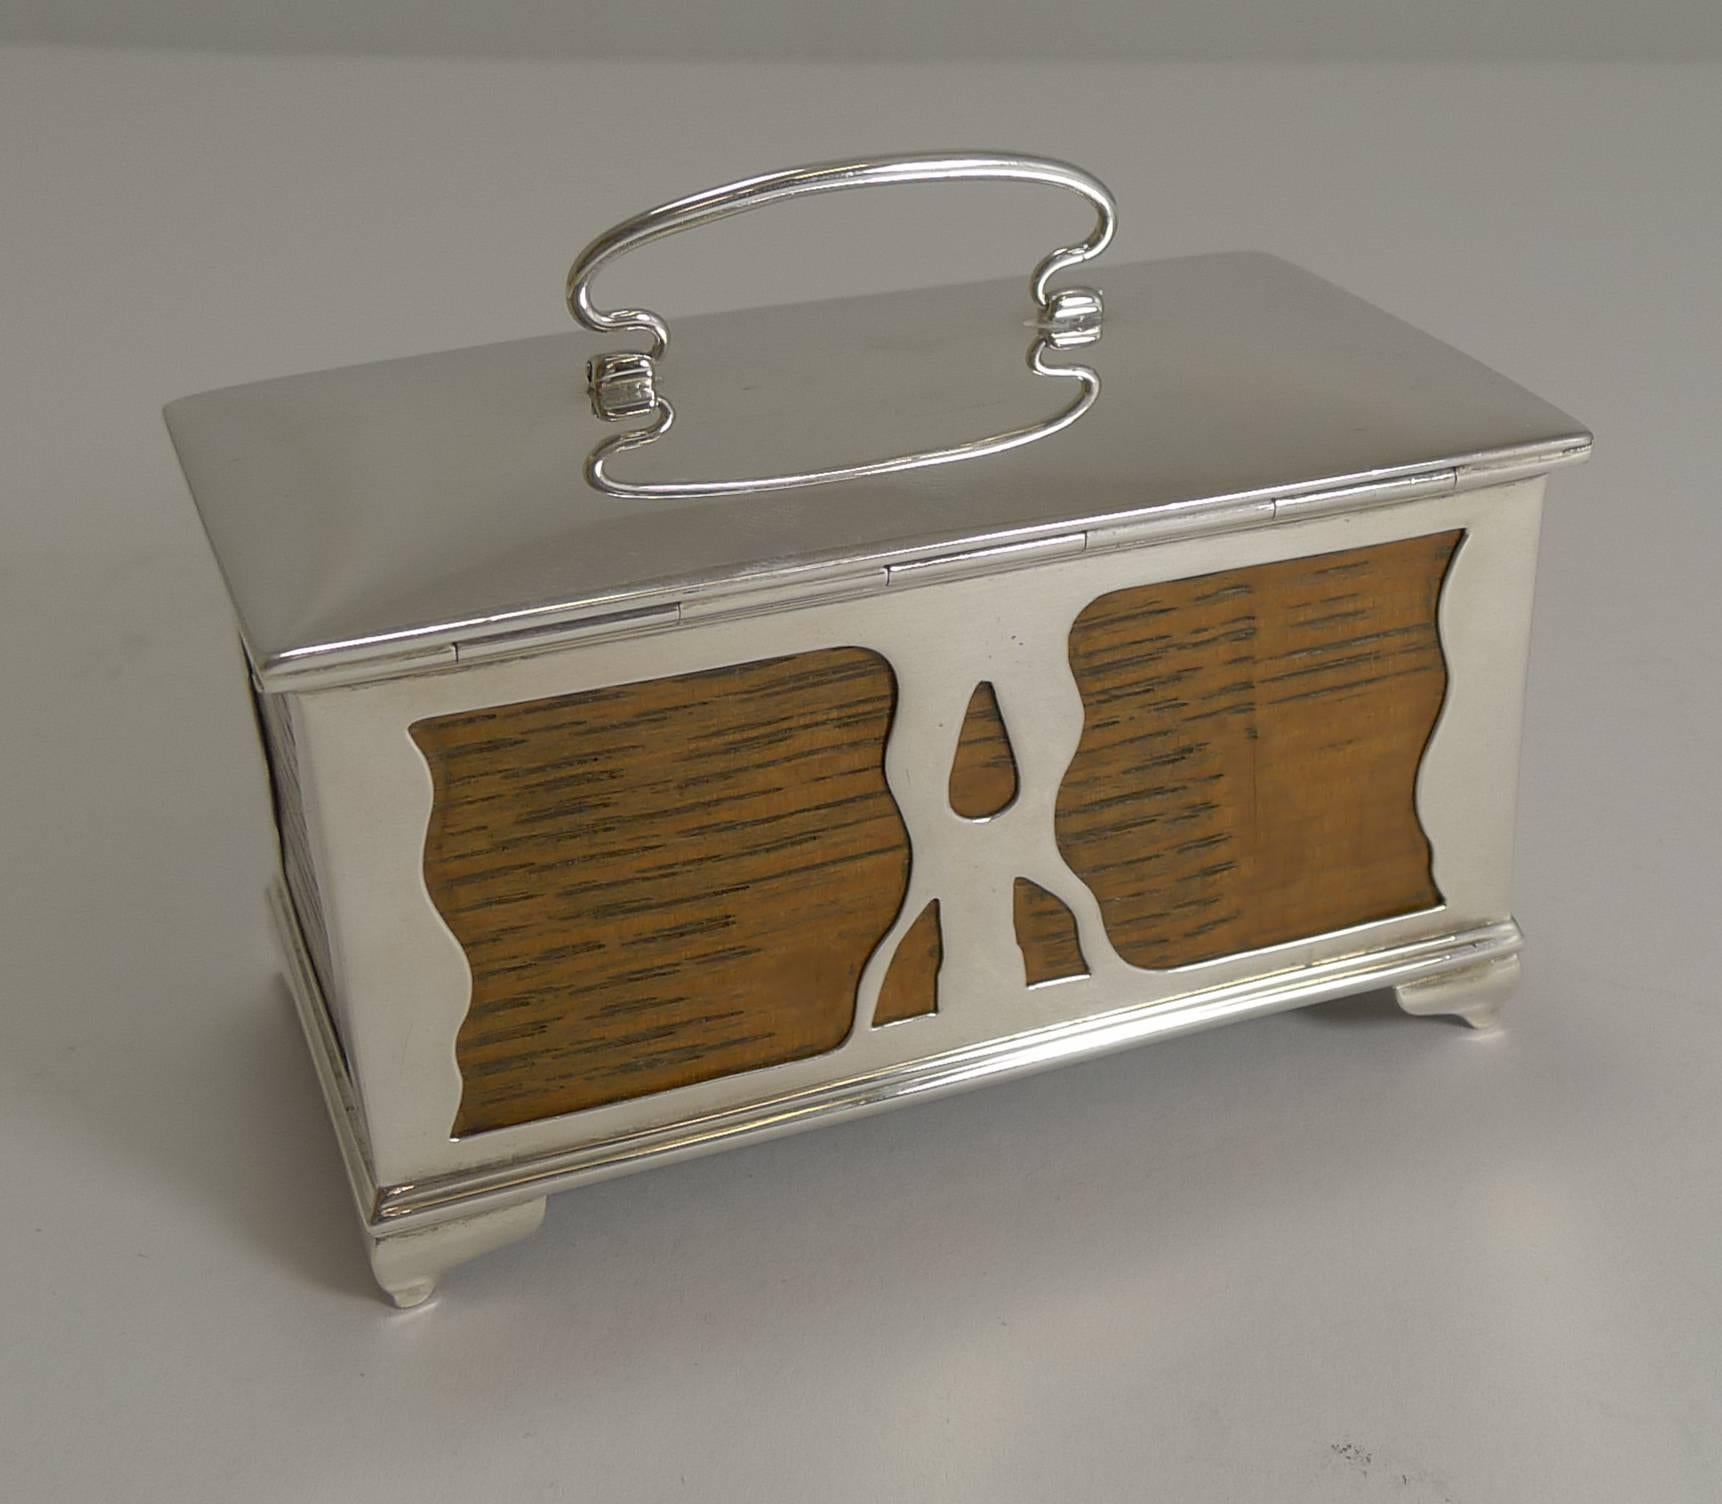 Early 20th Century English Art Nouveau Oak and Sterling Silver Trinket Box by Deakin and Francis